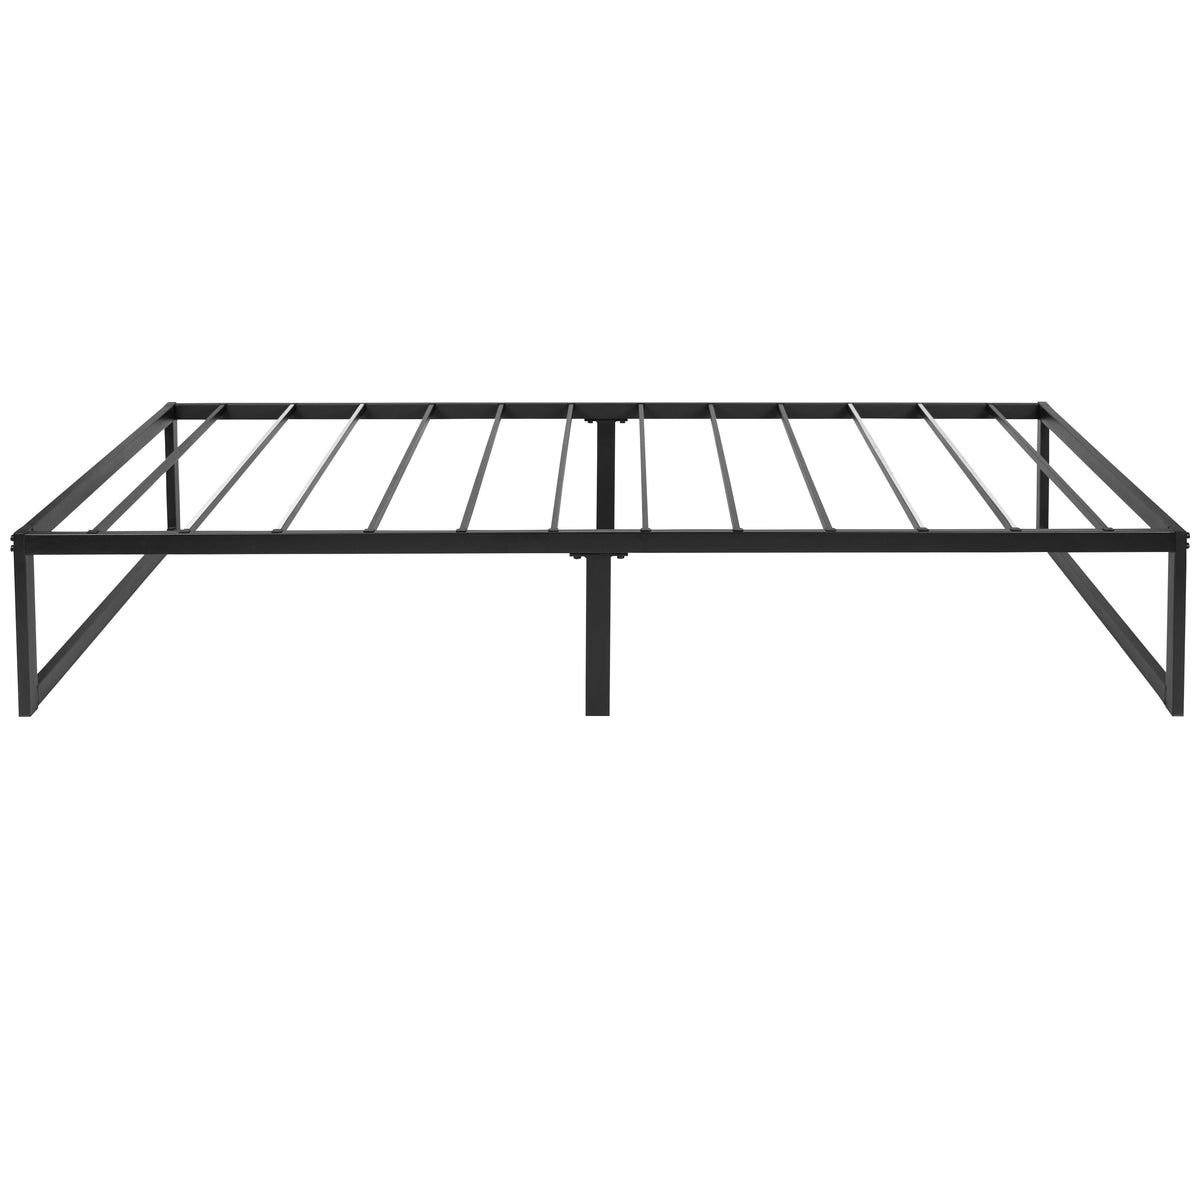 Twin |#| 14inch Twin Platform Bed Frame & 12inch Mattress in a Box - No Box Spring Required